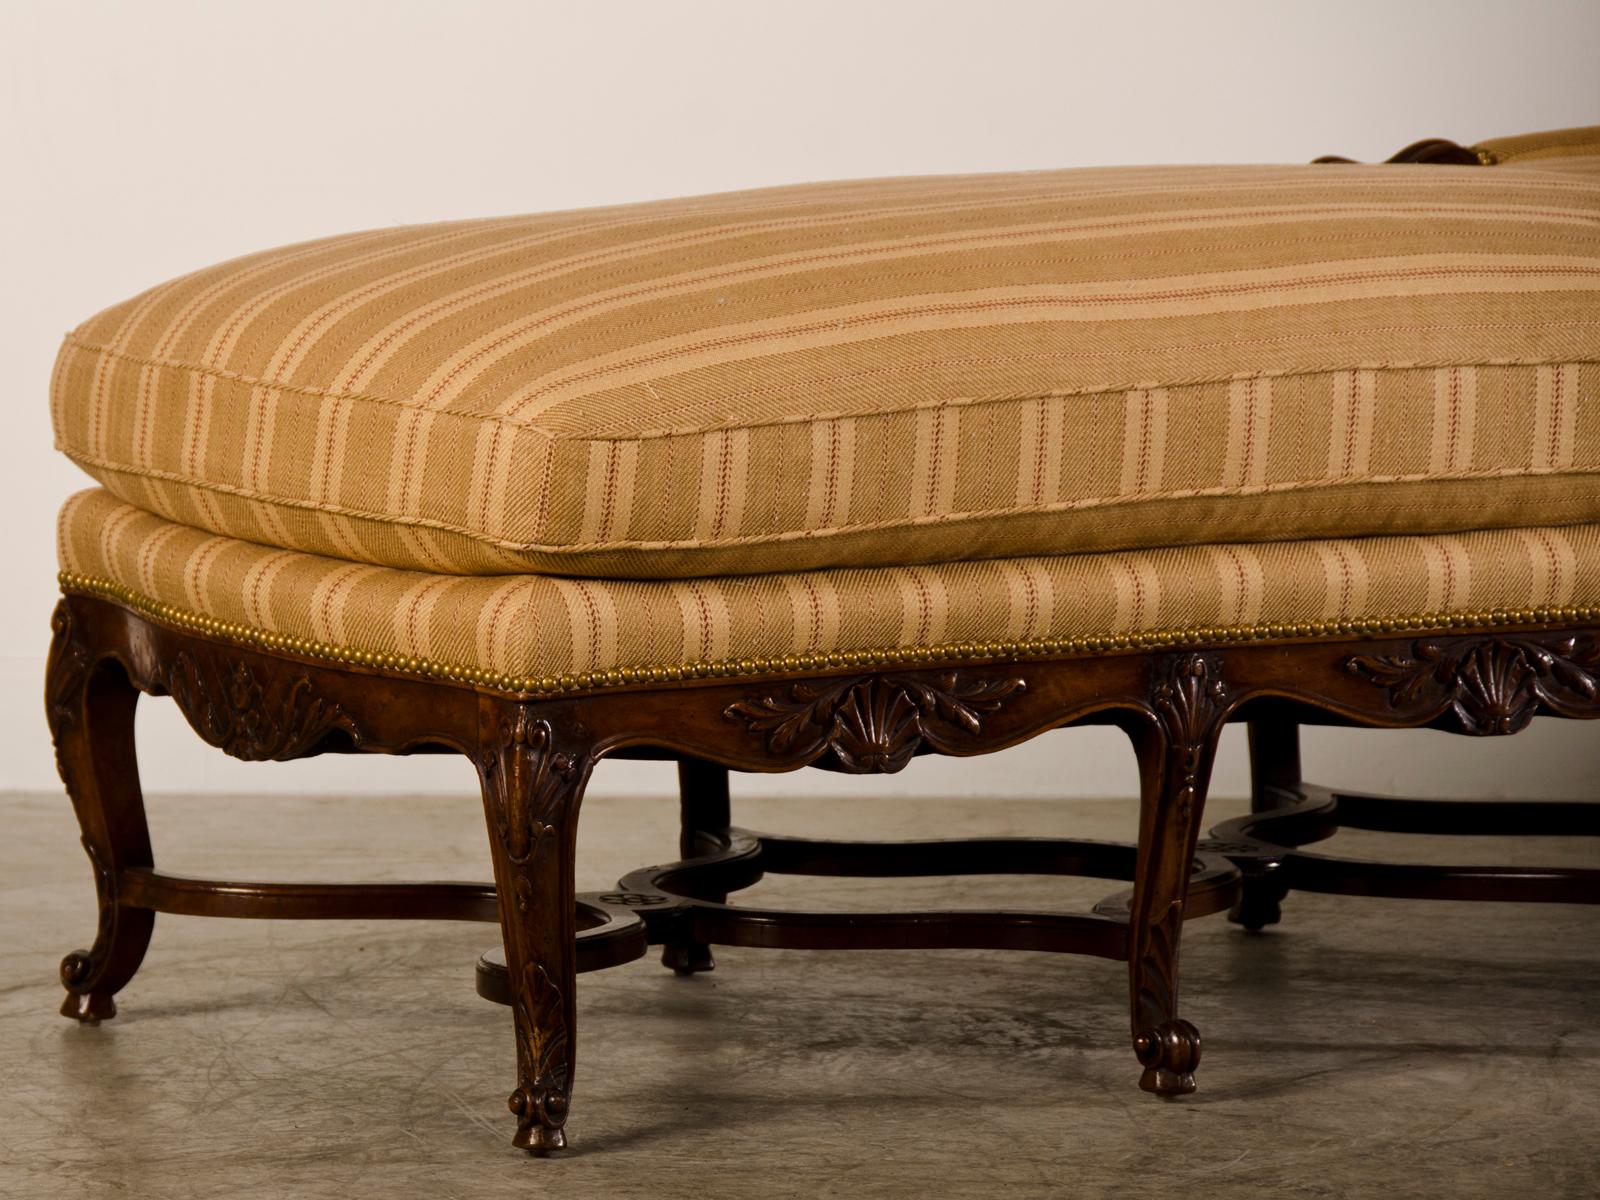 18th Century Antique French Régence Period Carved Walnut Chaise Lounge, circa 1720 For Sale